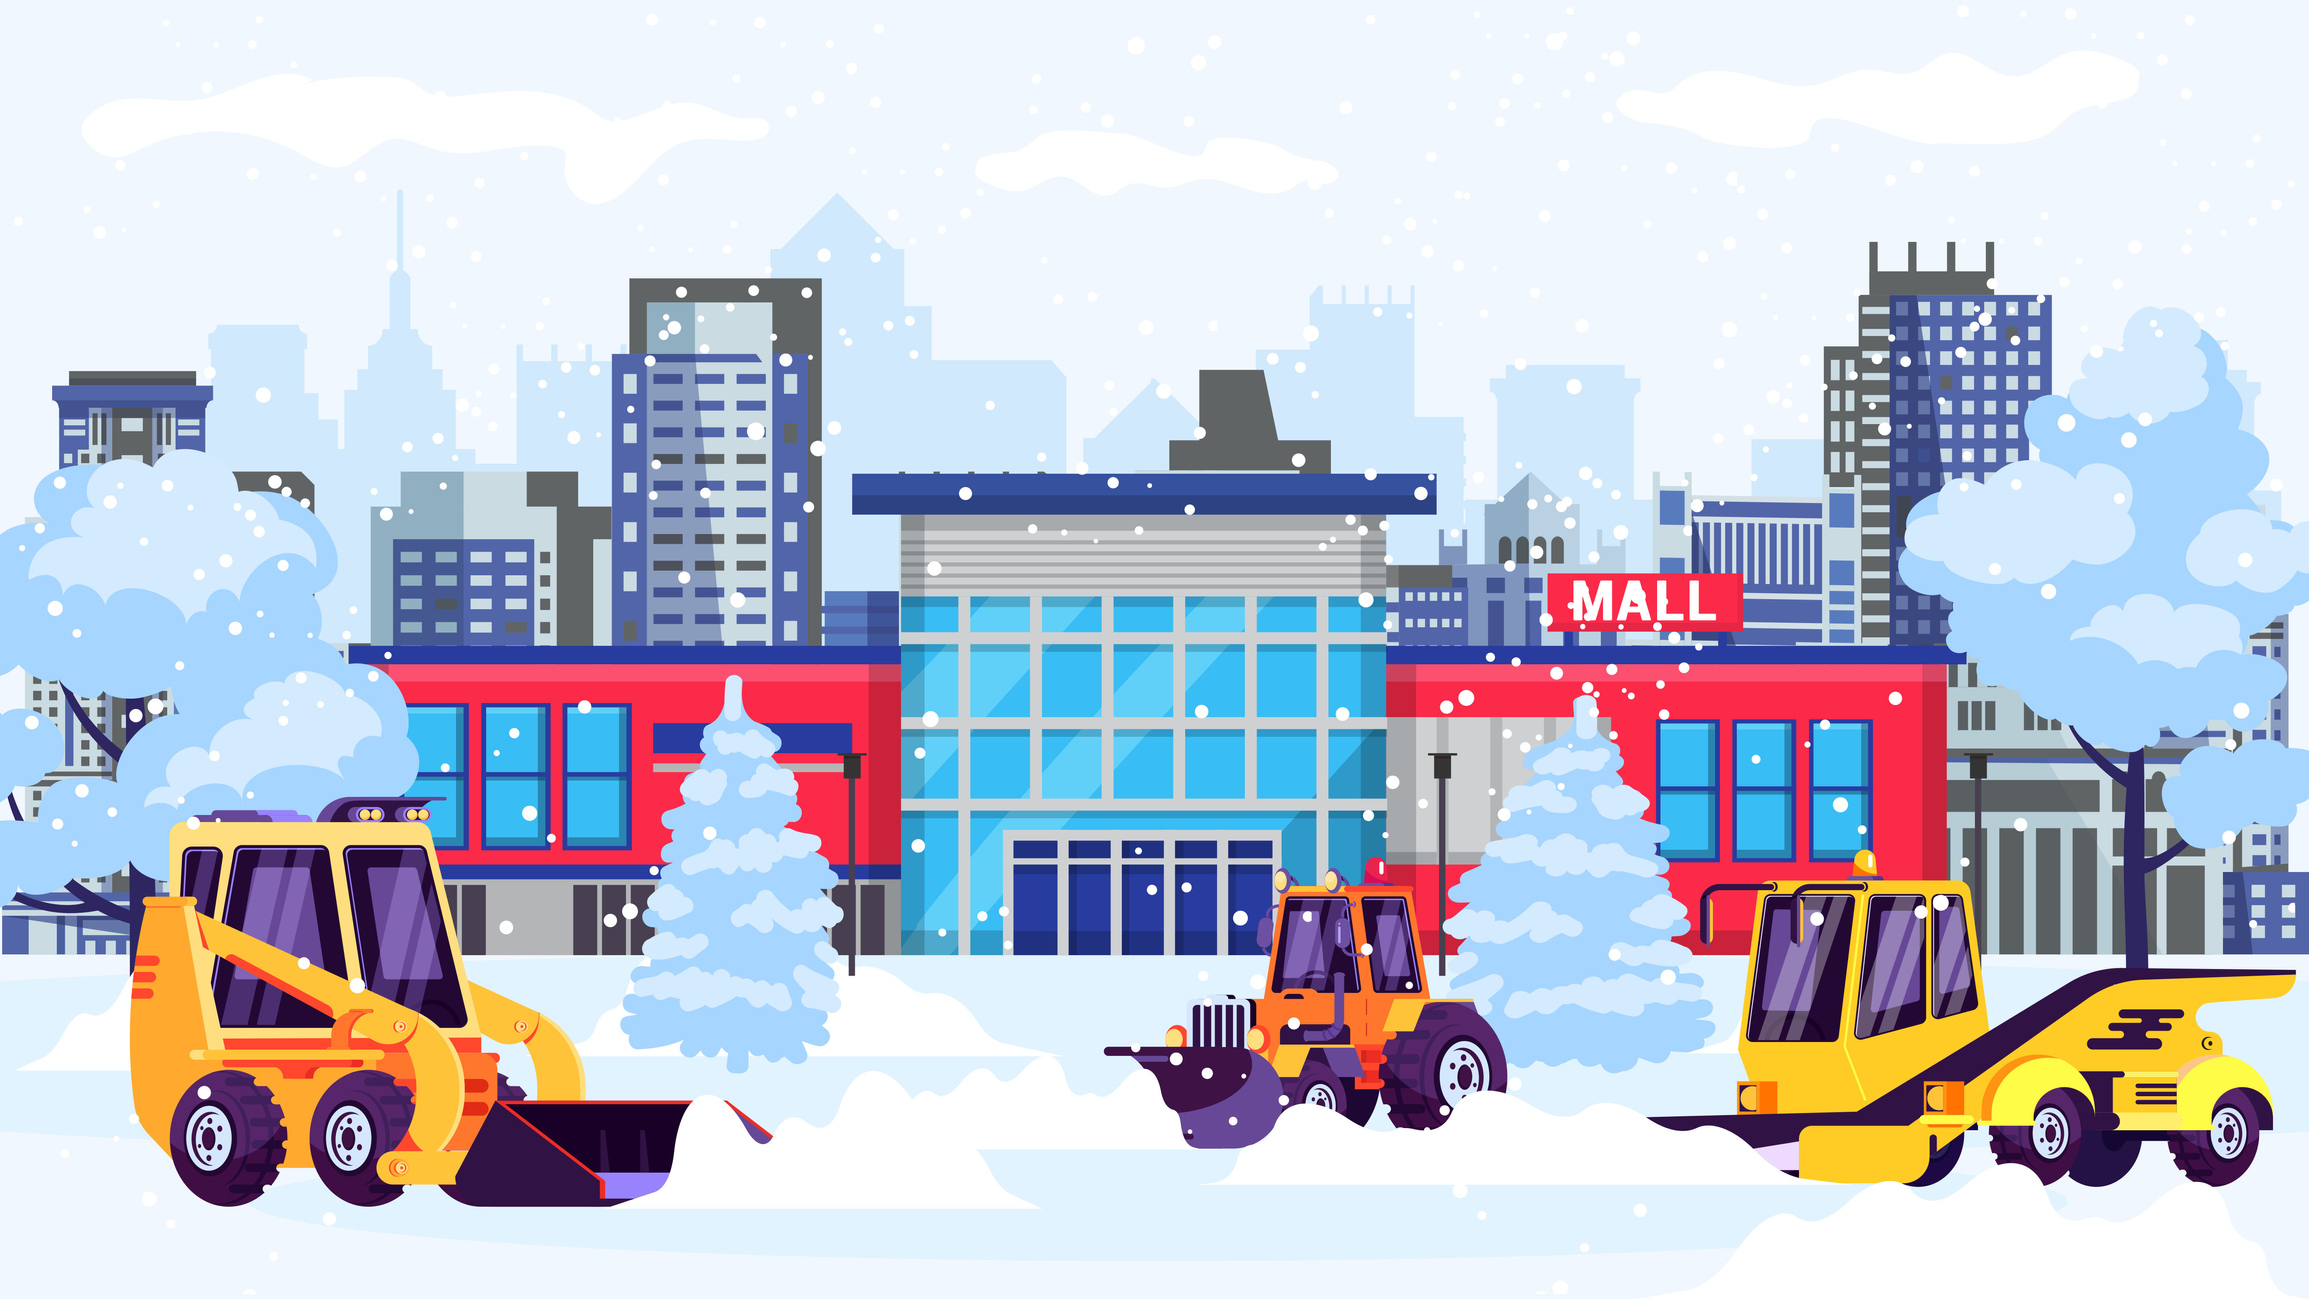 snowblowers-machines-clean-street-from-snow-at-shopping-mall-bui-1195736008_2313x1301